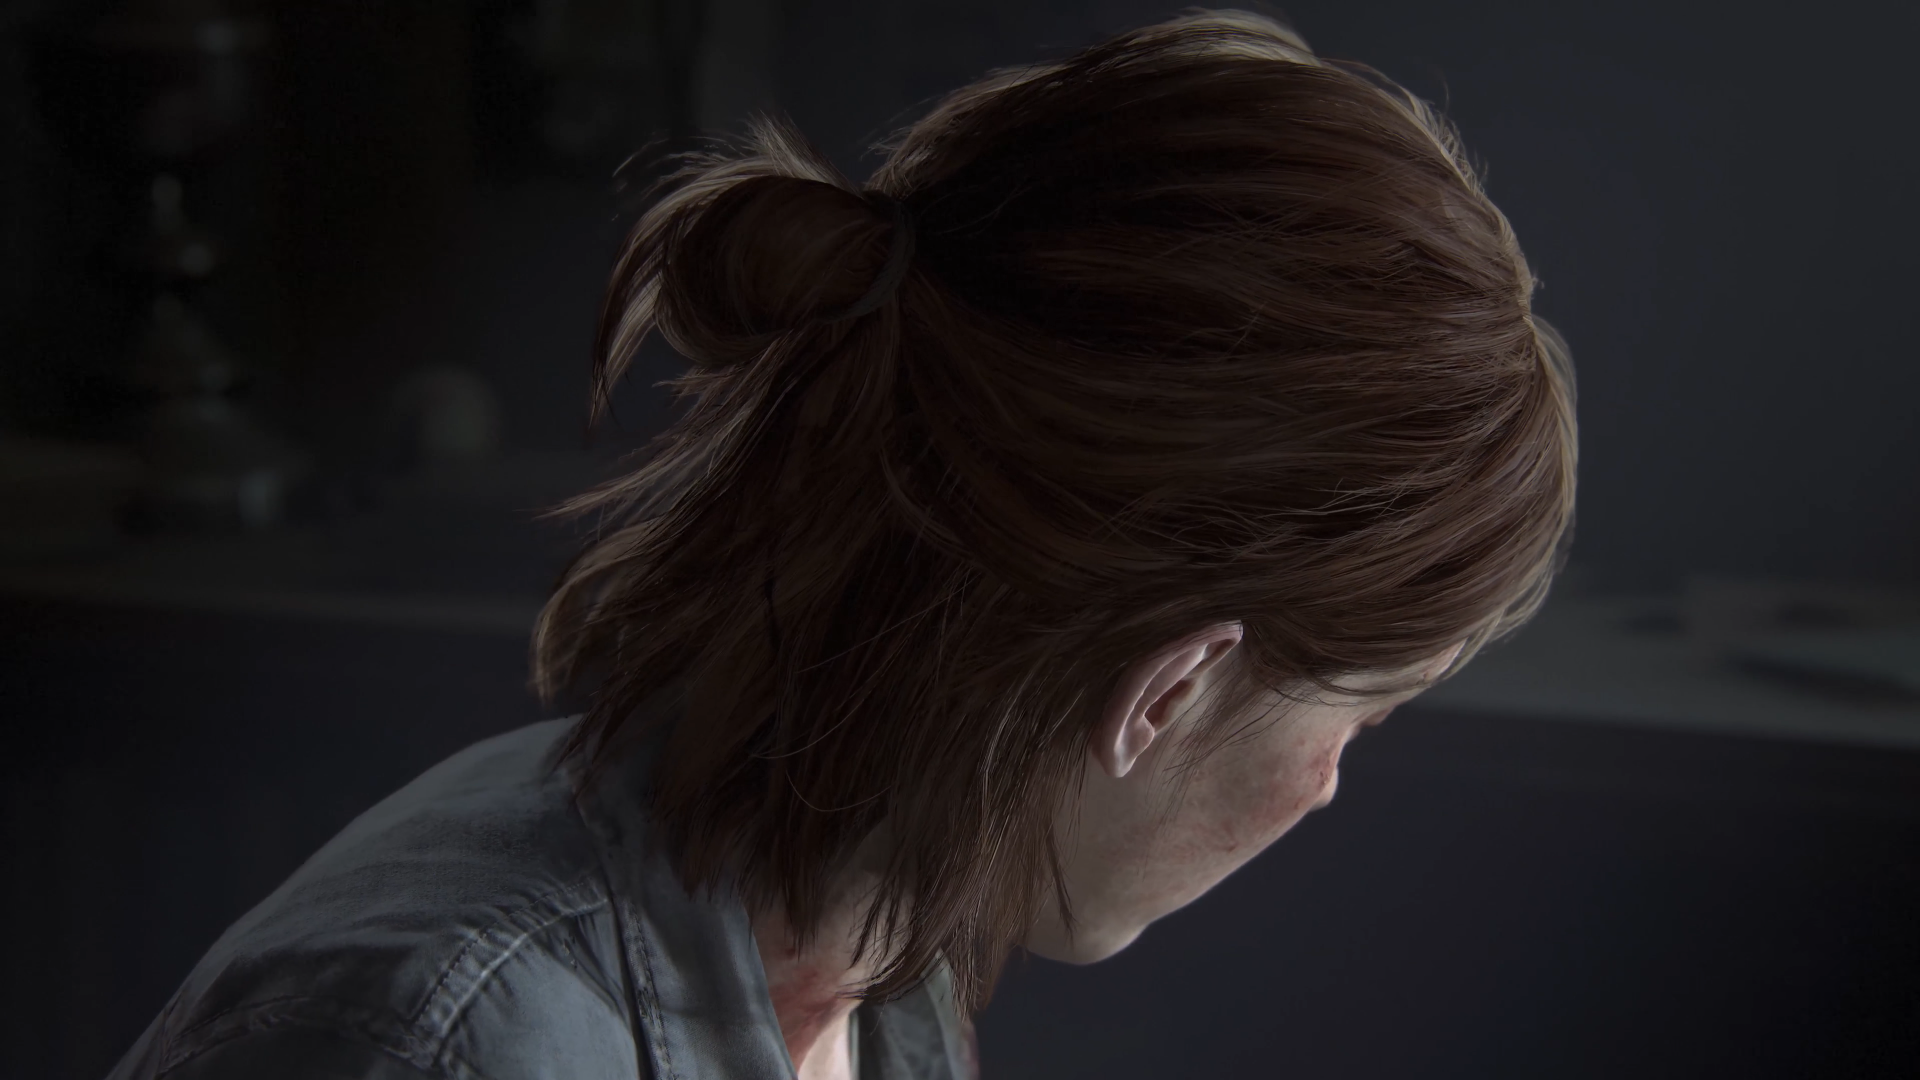 General 1920x1080 The Last of Us 2 video games screen shot Ellie Williams looking away brunette video game characters Naughty Dog